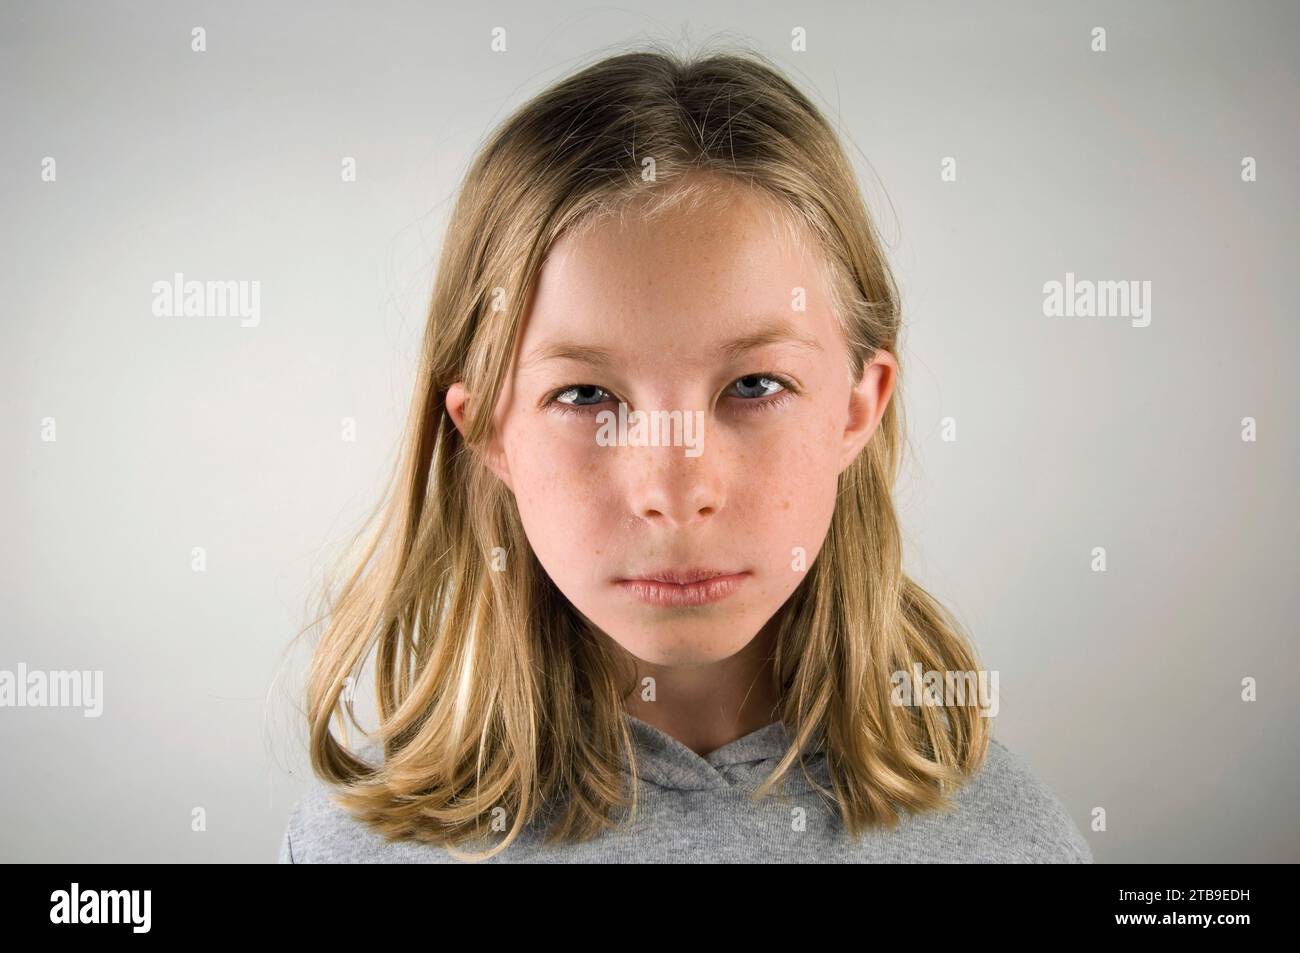 Preteen girl with a scowl on her face; Lincoln, Nebraska, United States of America. Stock Photo